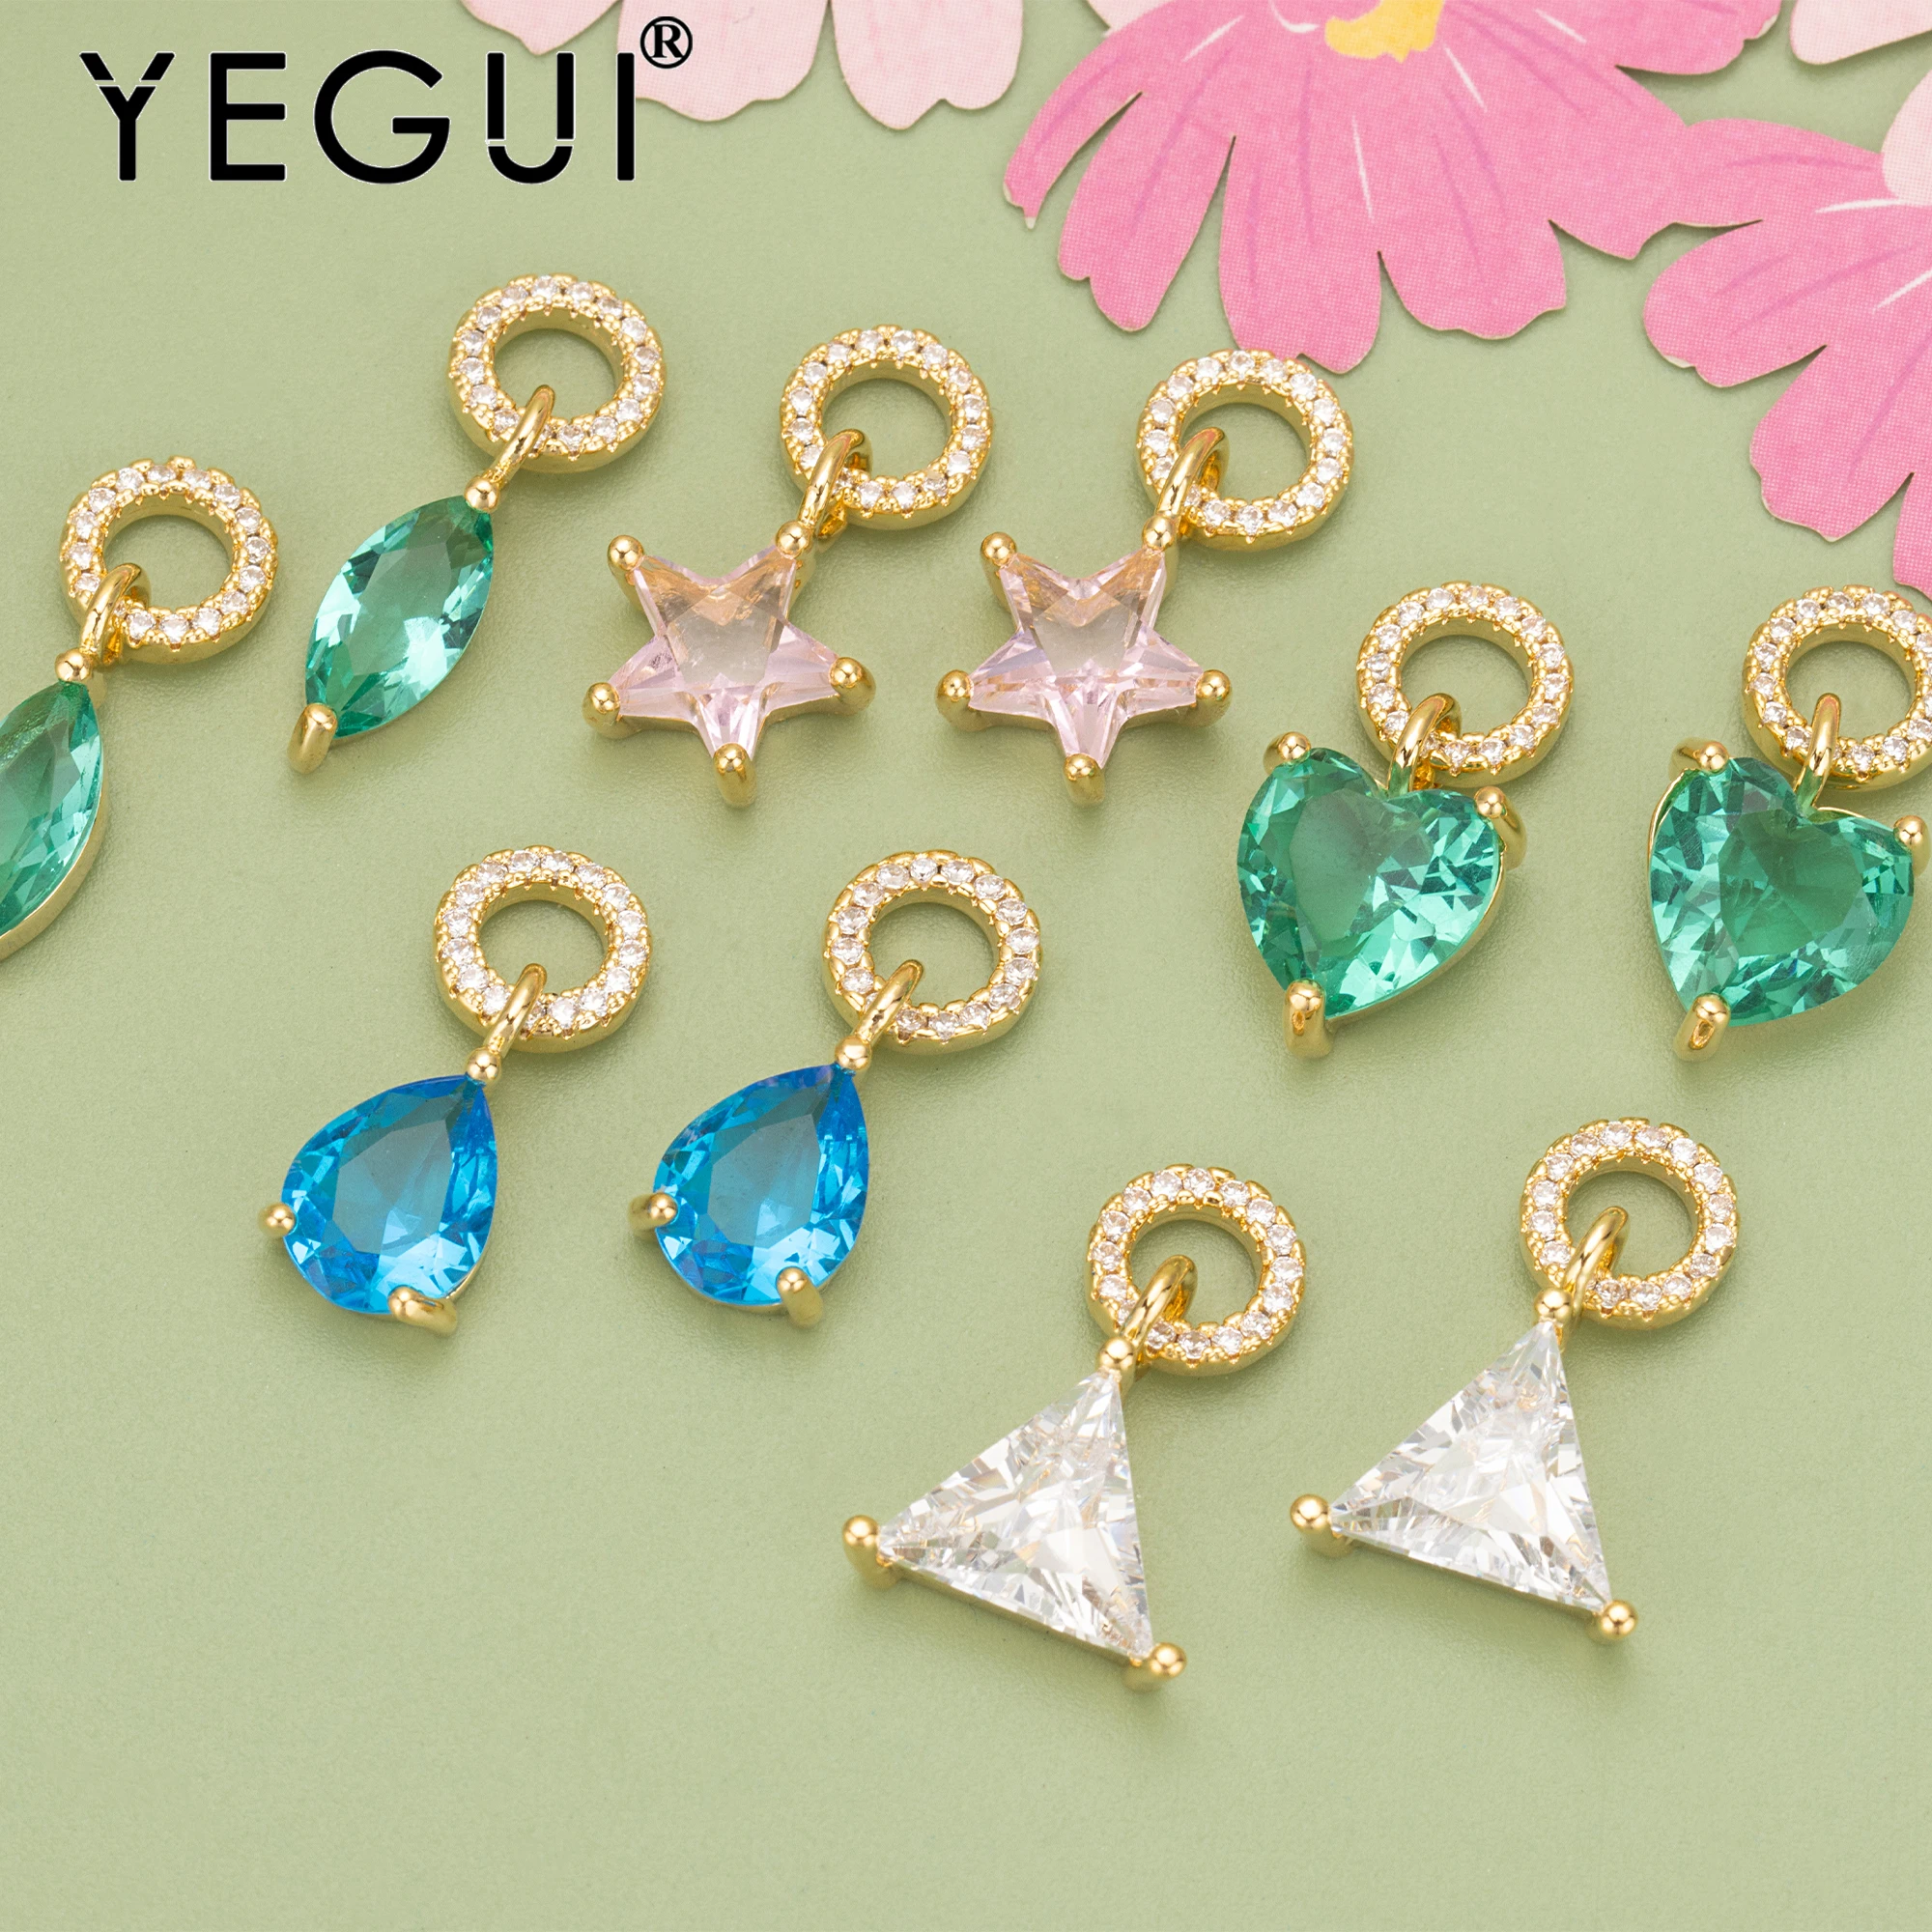 

YEGUI MD01,jewelry accessories,18k gold plated,nickel free,copper,zircons,charms,hand made,jewelry making,diy pendants,6pcs/lot